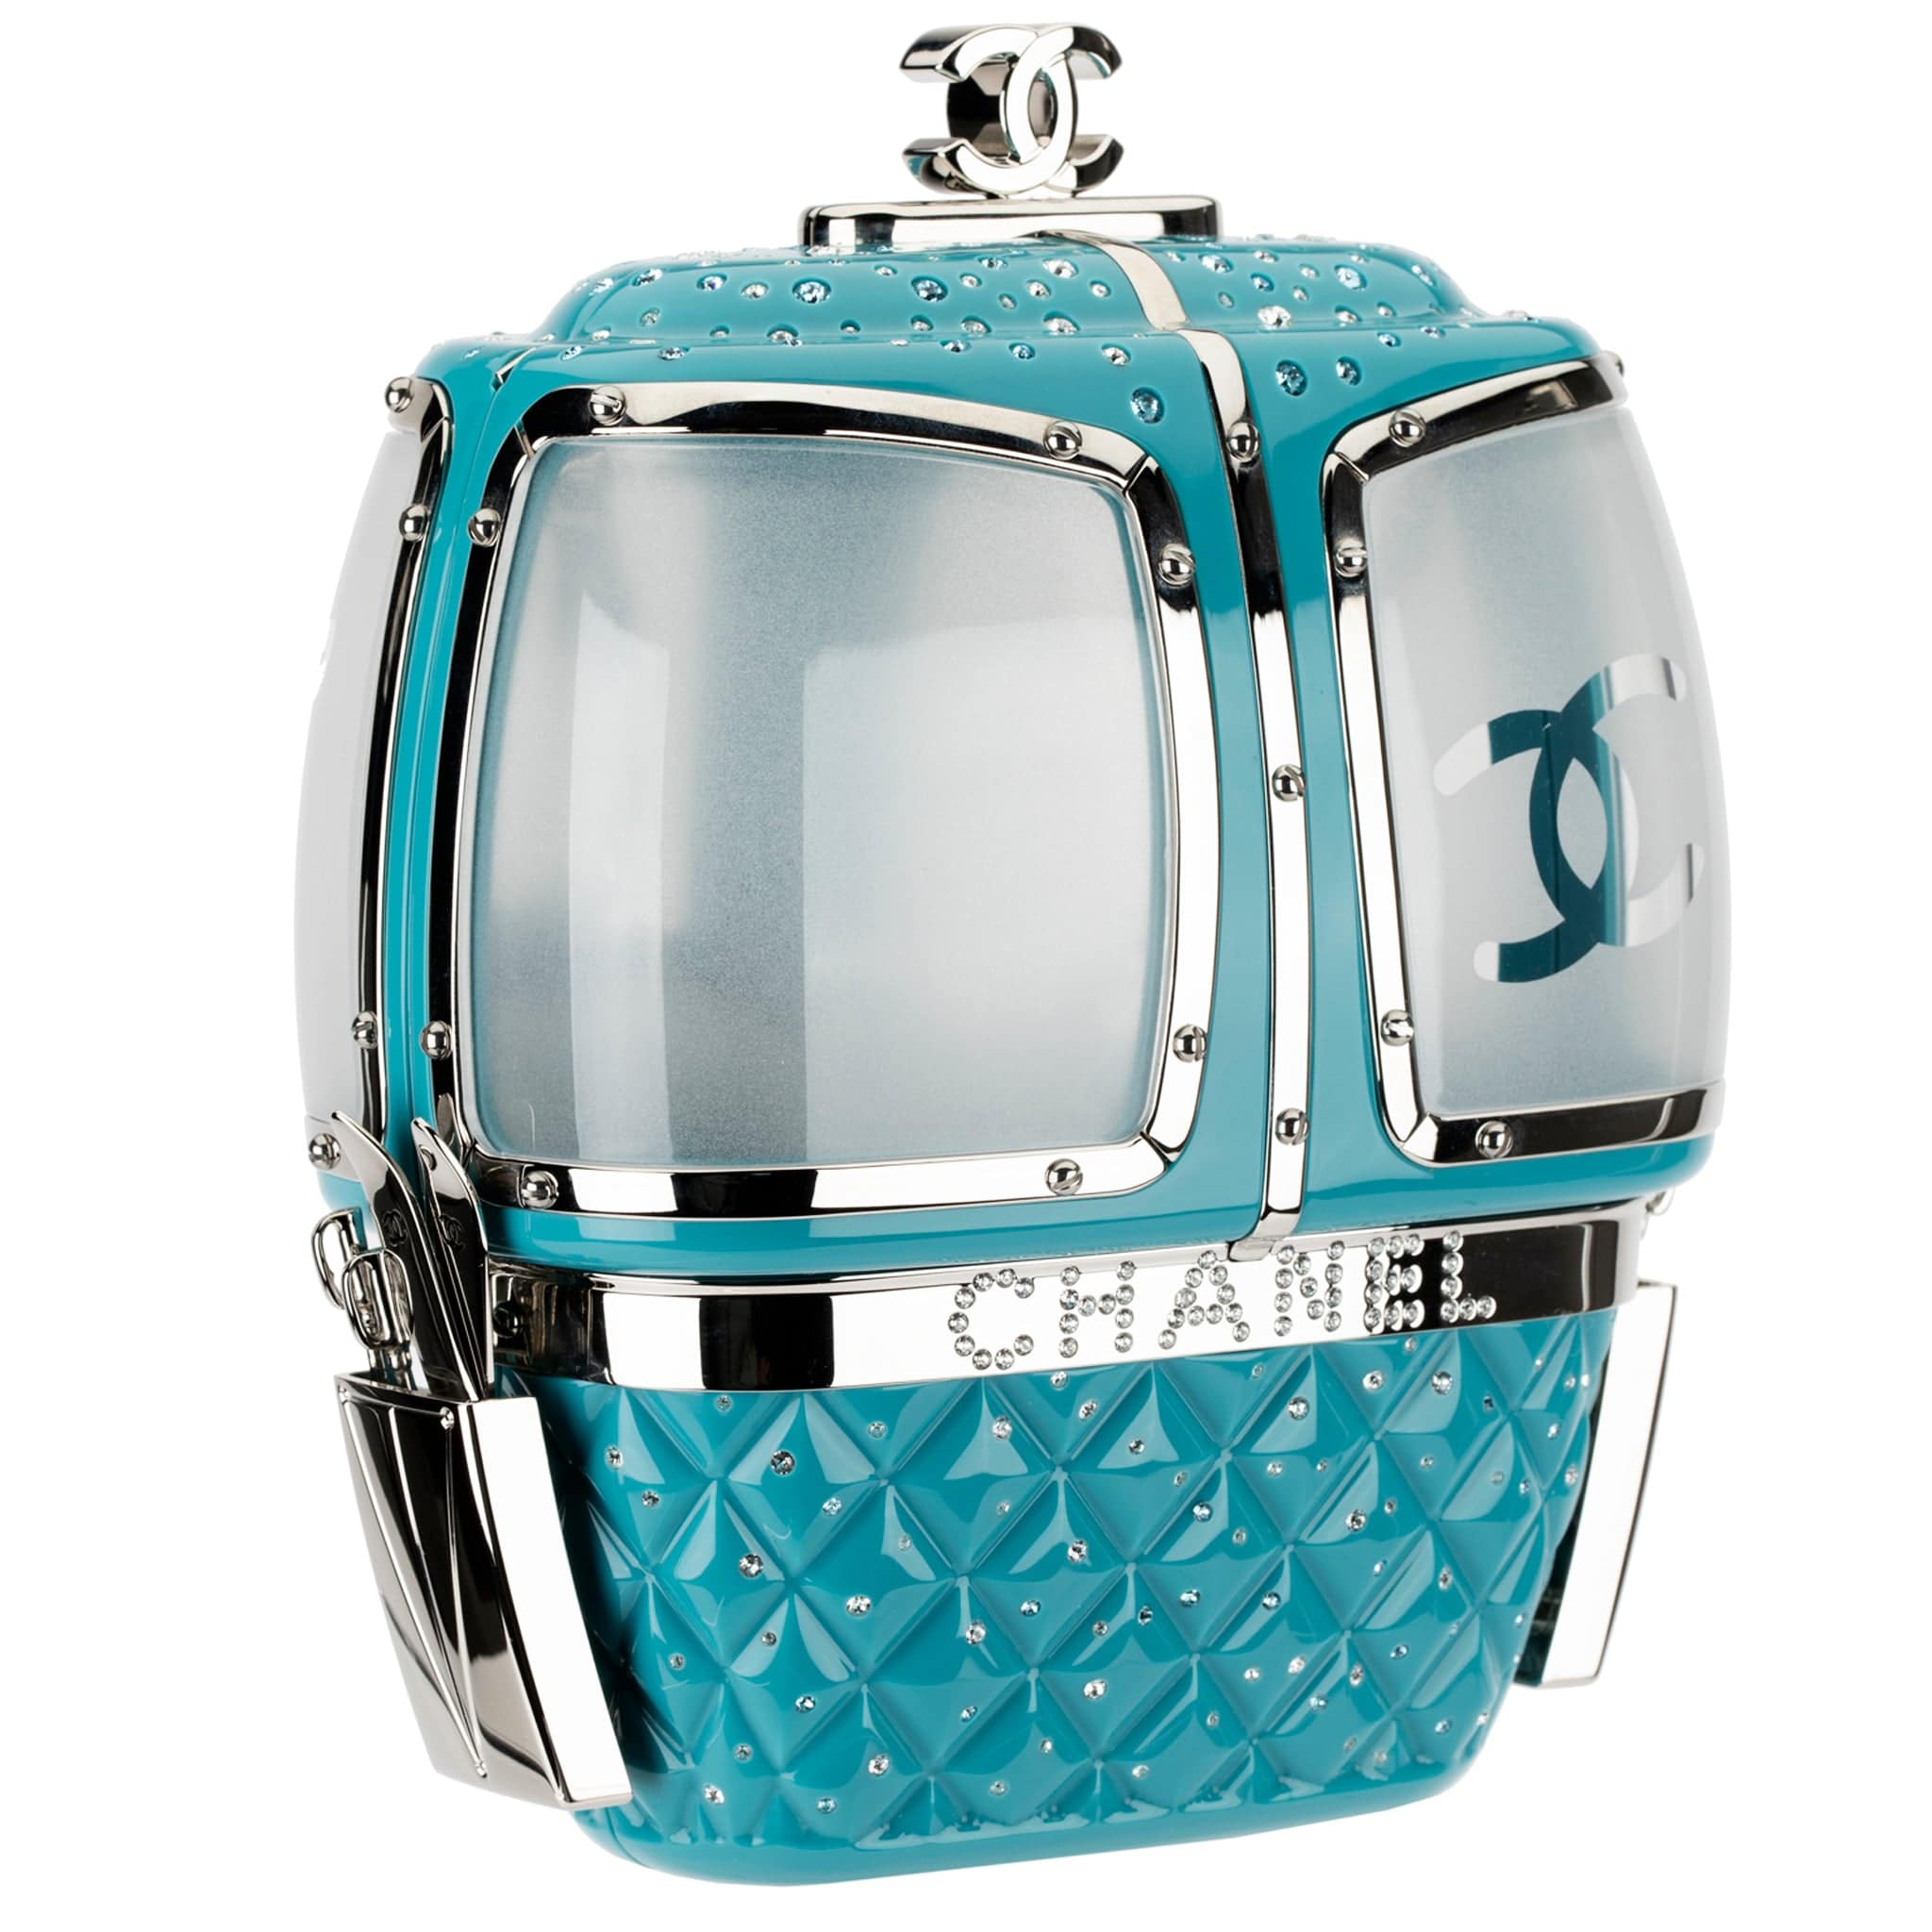 CHANEL MINAUDIÈRE LIMITED EDITION TURQUOISE SNOW GONDOLA SILVER-TONE HARDWARE - On Repeat